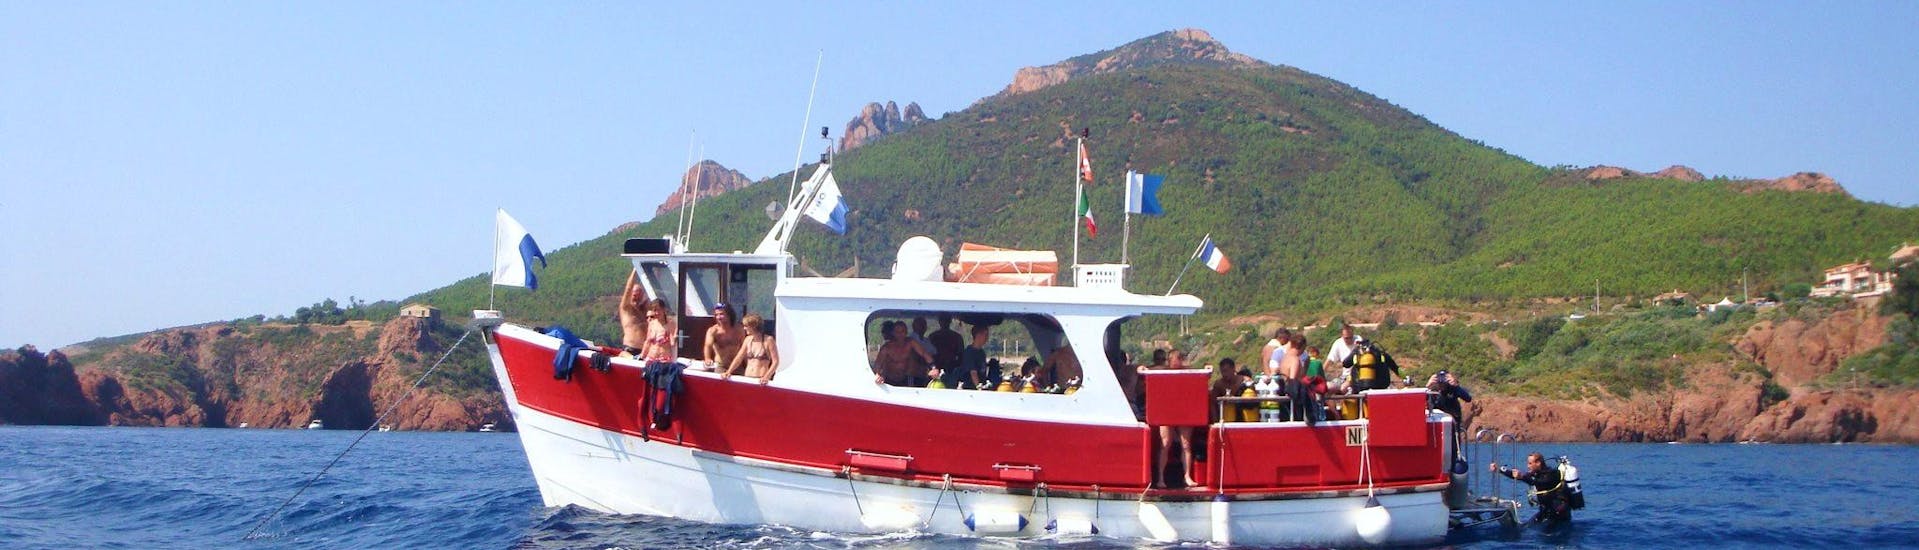 Our boat during the Snorkeling Excursion near Cannes with Dive Centre La Rague.